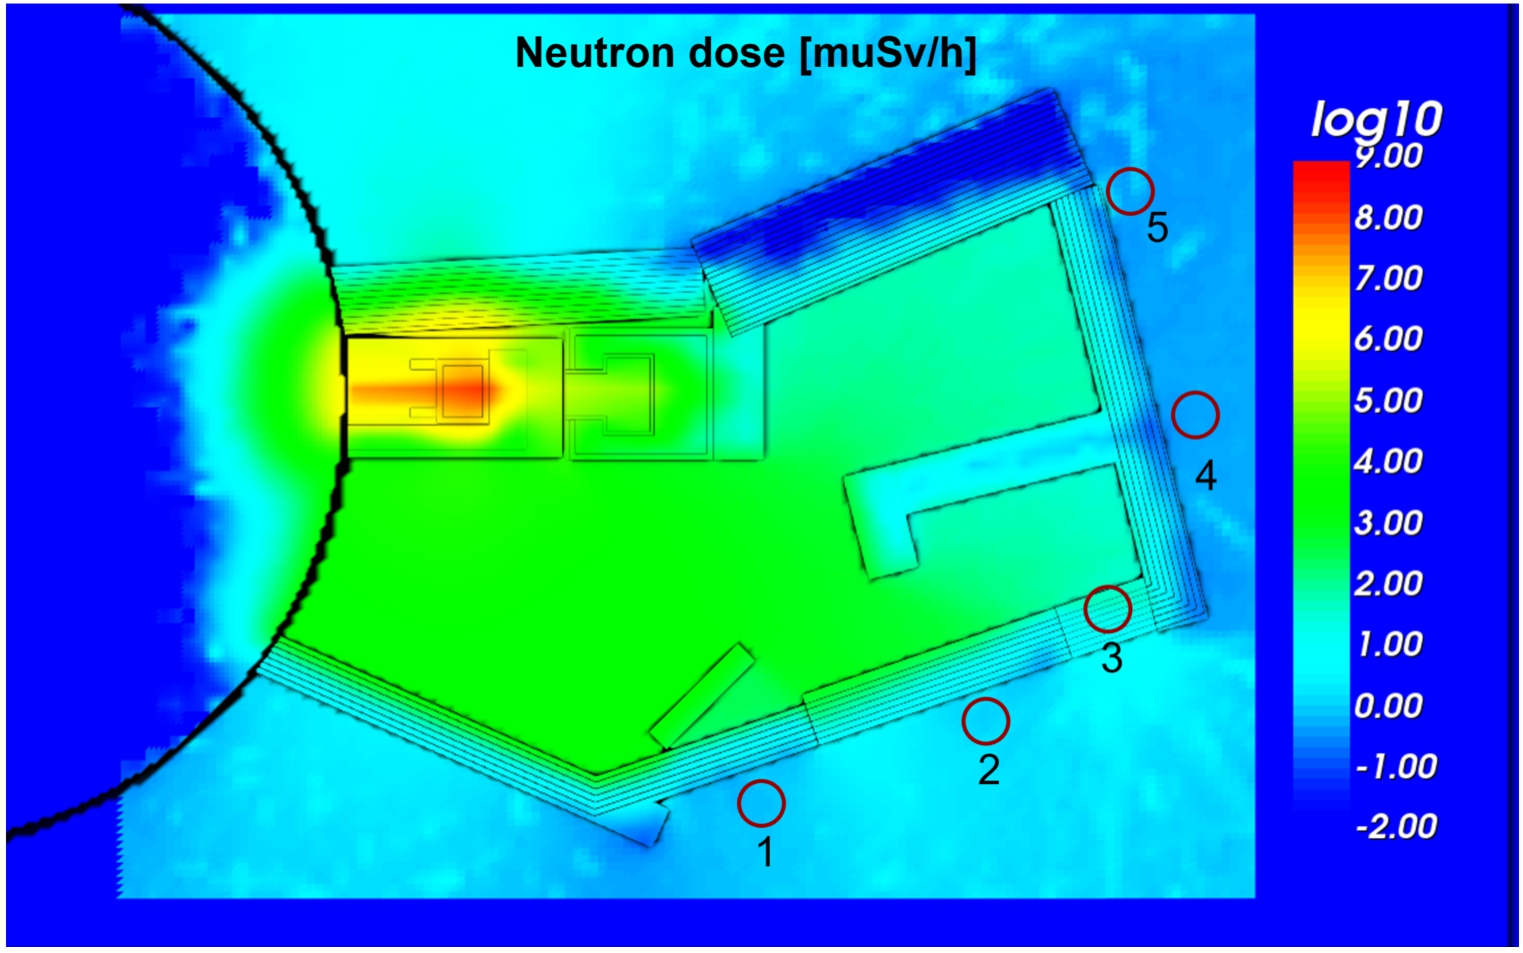 Neutron dose rate map with a spatial resolution of 10 cm × 10 cm × 10 cm. The dose rates are calculated using the Neutron Fluence-to-Dose Rate Conversion Factors based on ICRP-116 and assuming a neutron current of 2.81 × 1011 n/s through the beam port of channel #4. Units are µSv/h in log scale. The five points where the dose rates were measured are also shown.